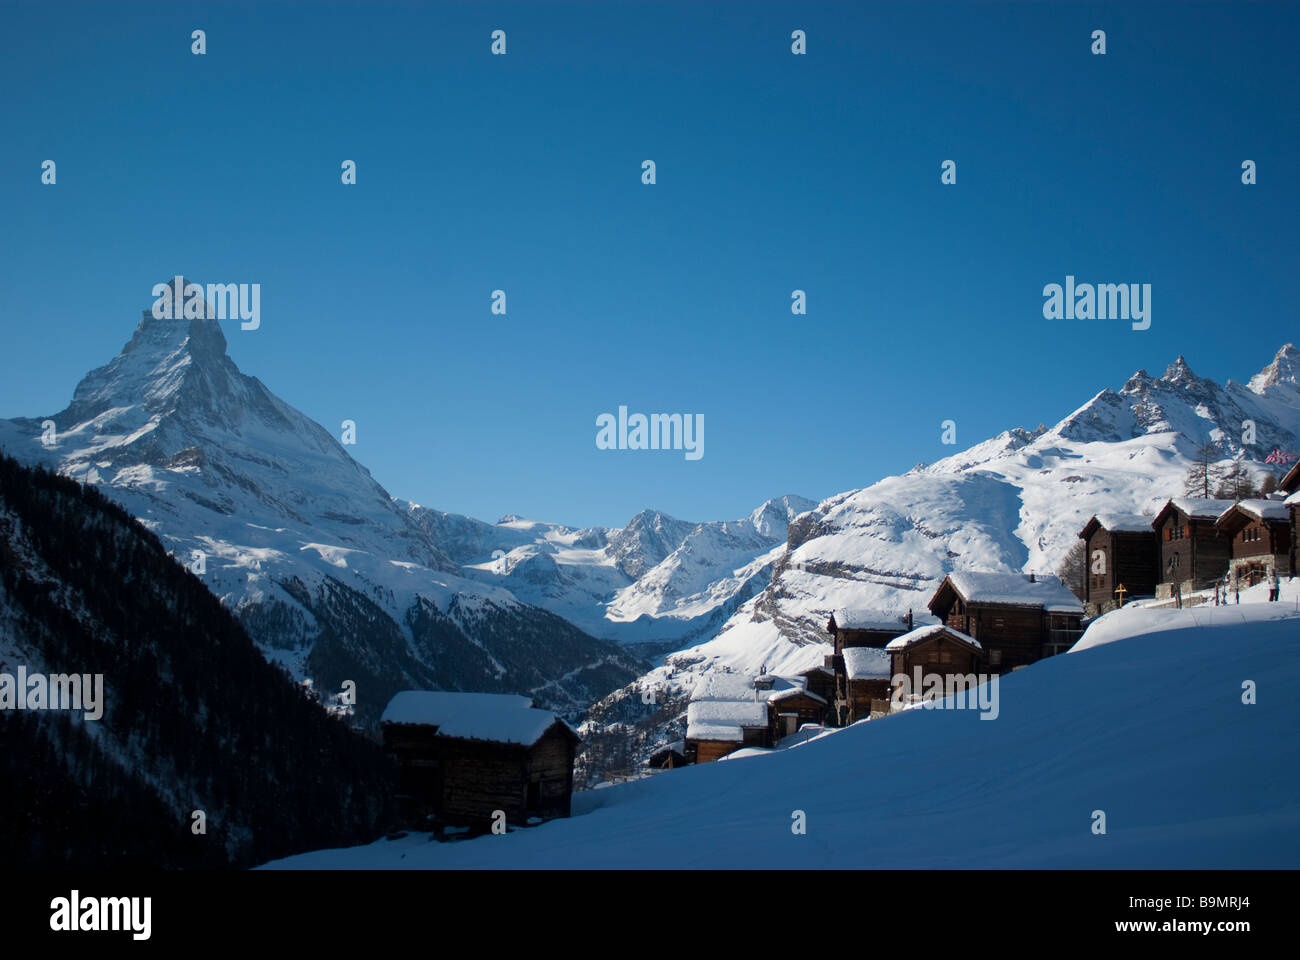 Snowed chalets backed by the Matterhorn in Zermatt The mountain is the most famous symbol of Switzerland. Stock Photo